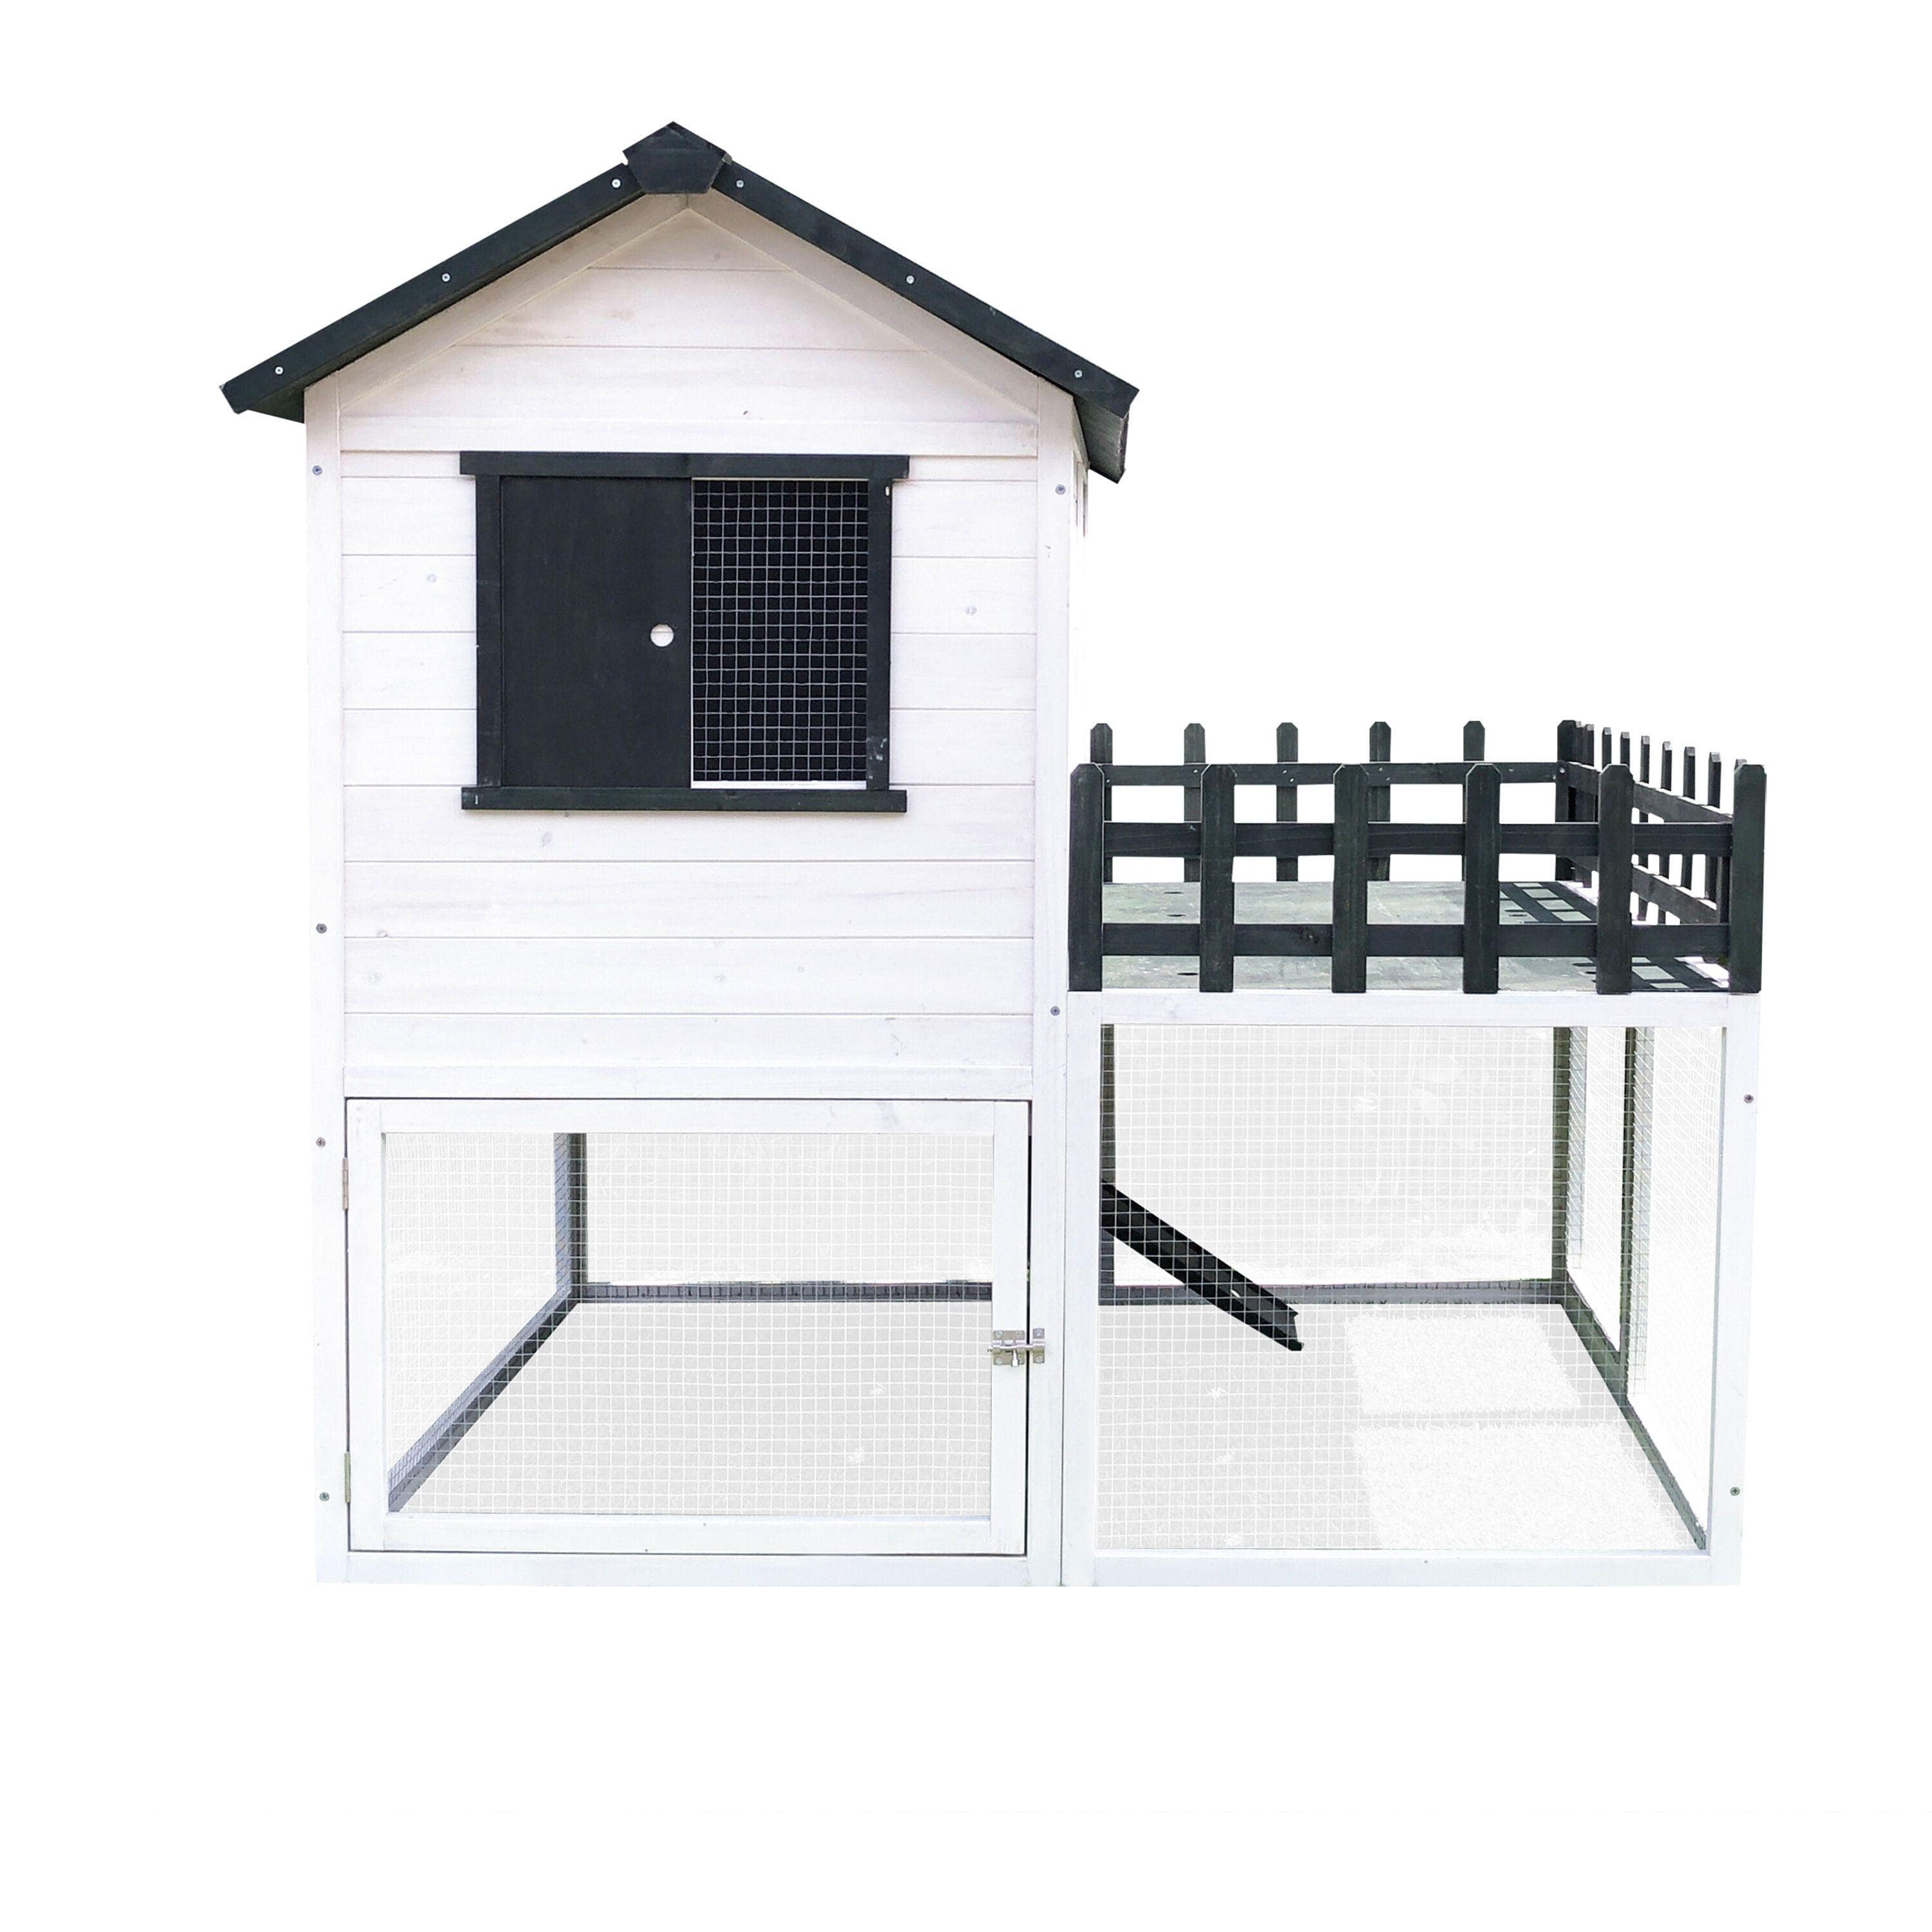 Hanover Hanover Elevated Wooden Chicken Coop with Ramp, Planting Area, Wire Mesh Run, Waterproof Roof, 4.25 Ft. x 4 Ft. x 4.2 Ft.